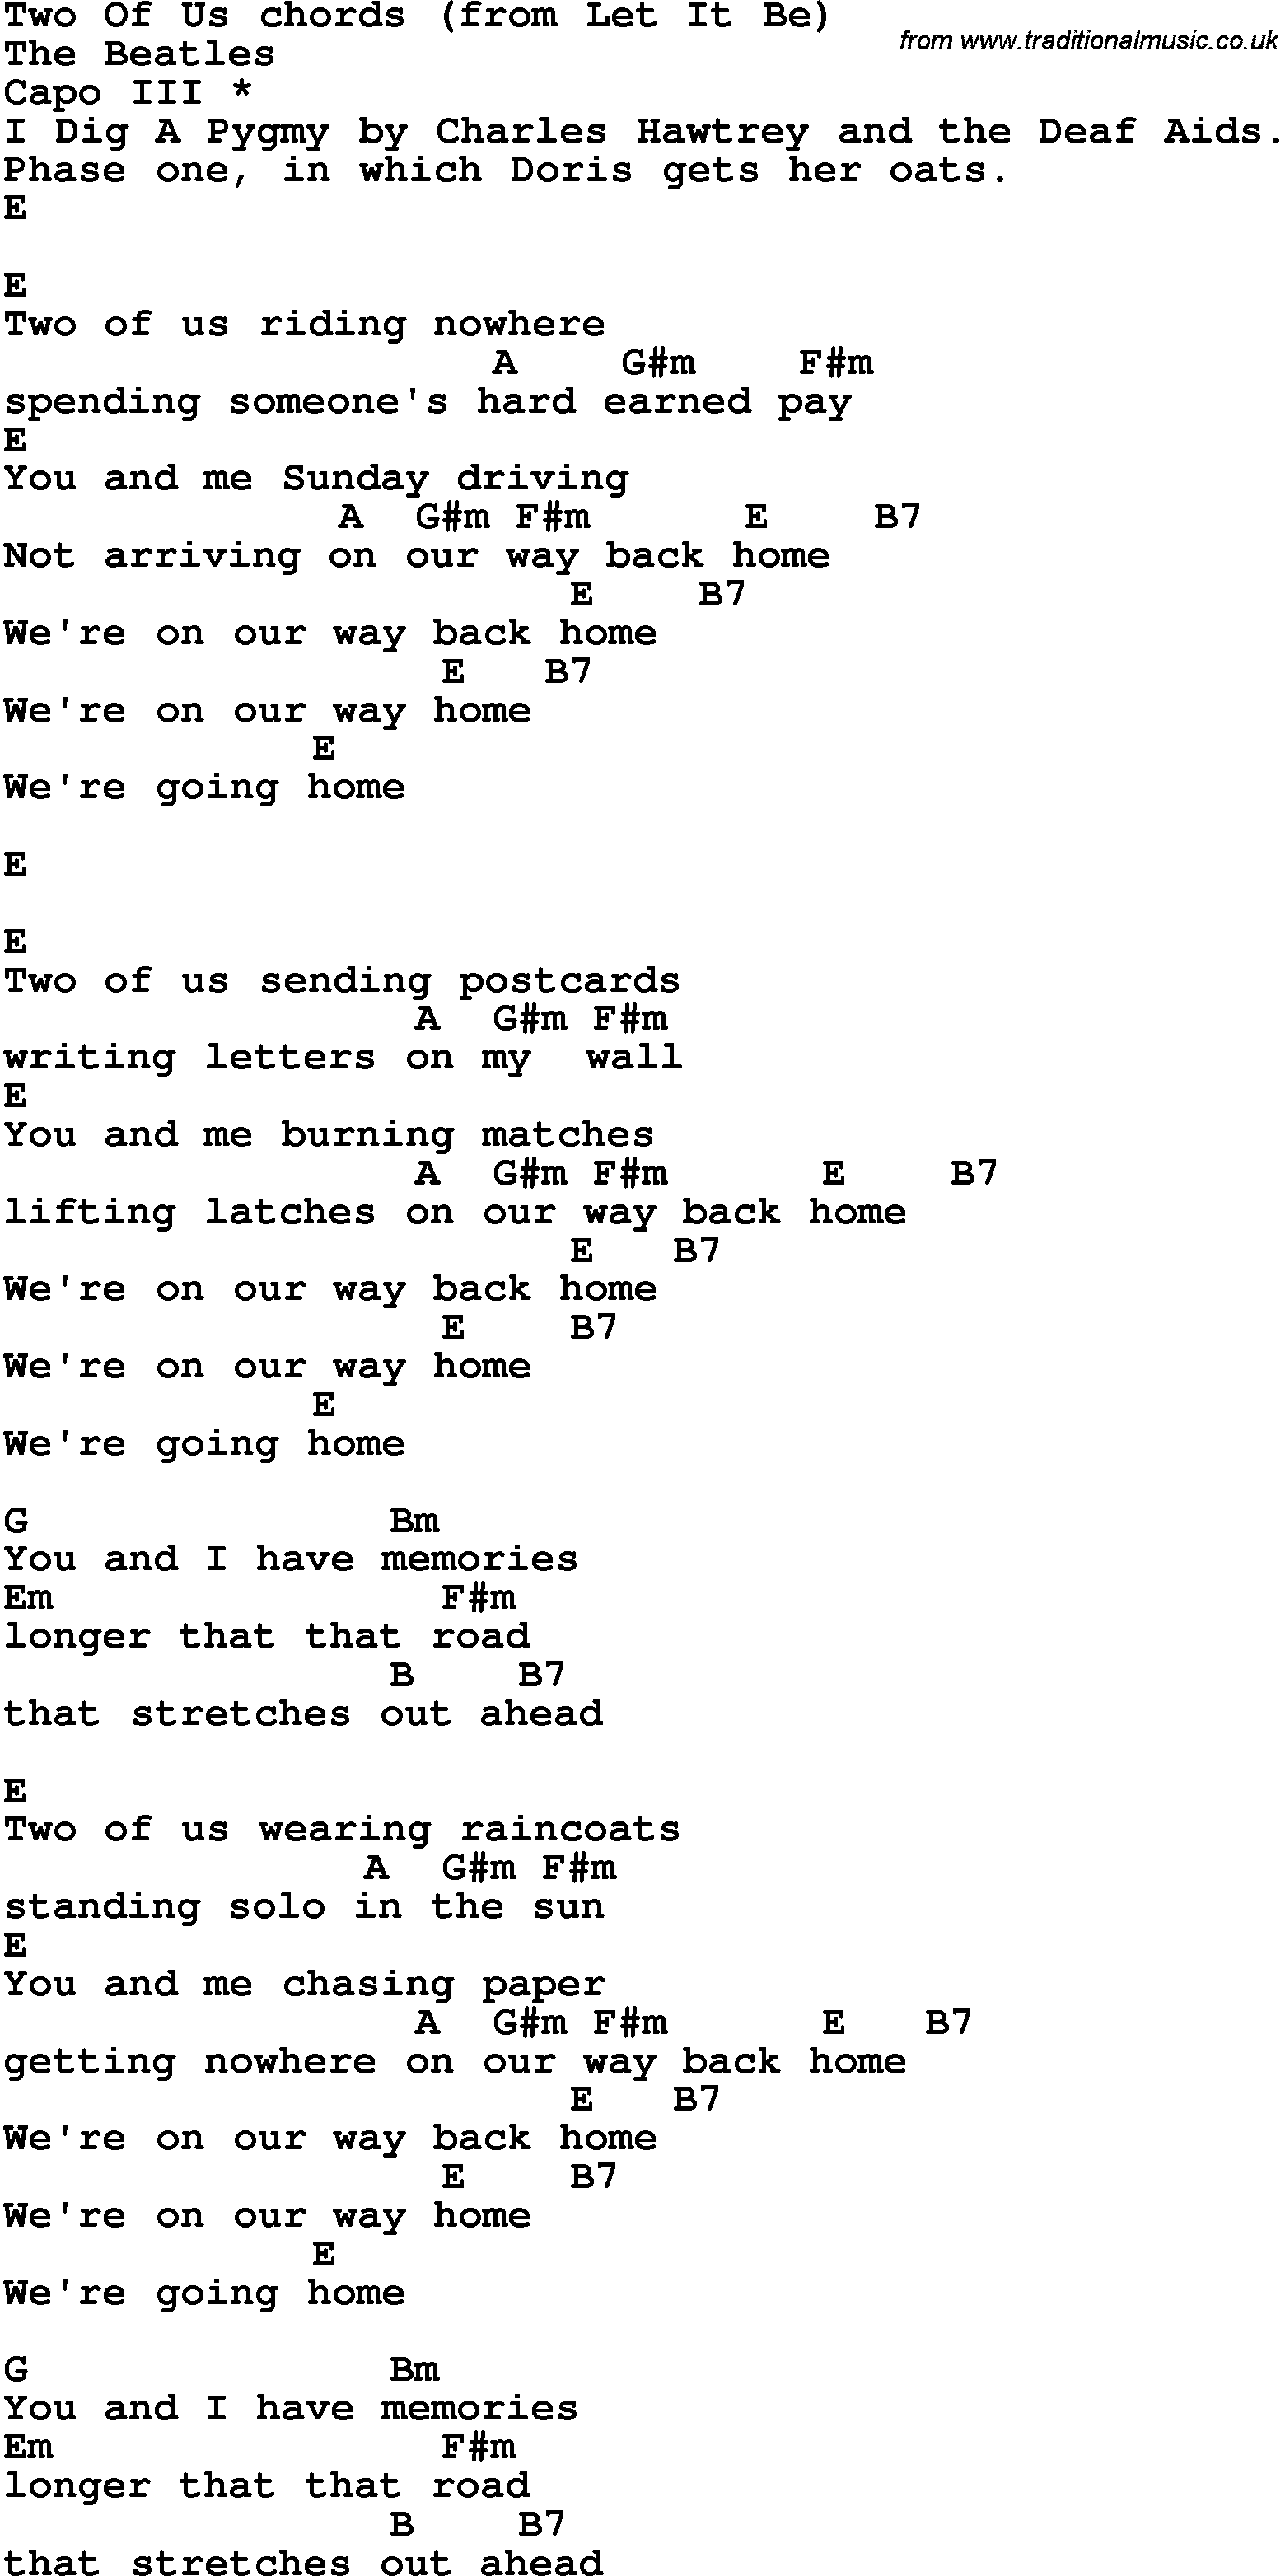 Song lyrics with guitar chords for Two Of Us